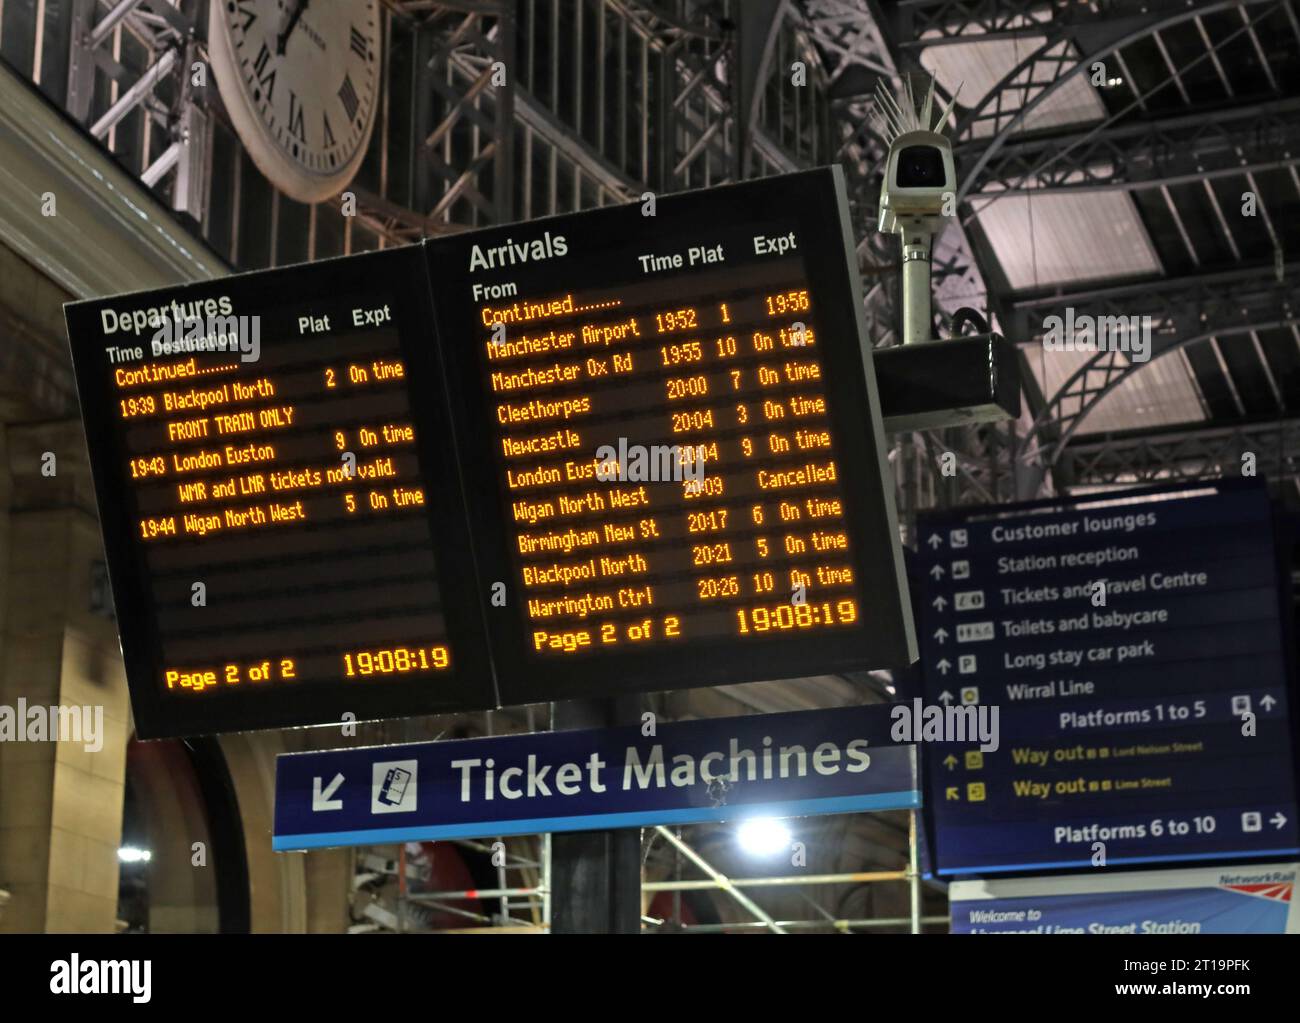 Evening departures and arrivals board and ticket machines, at Lime St, Liverpool, Merseyside, England, UK,,L1 1JD Stock Photo